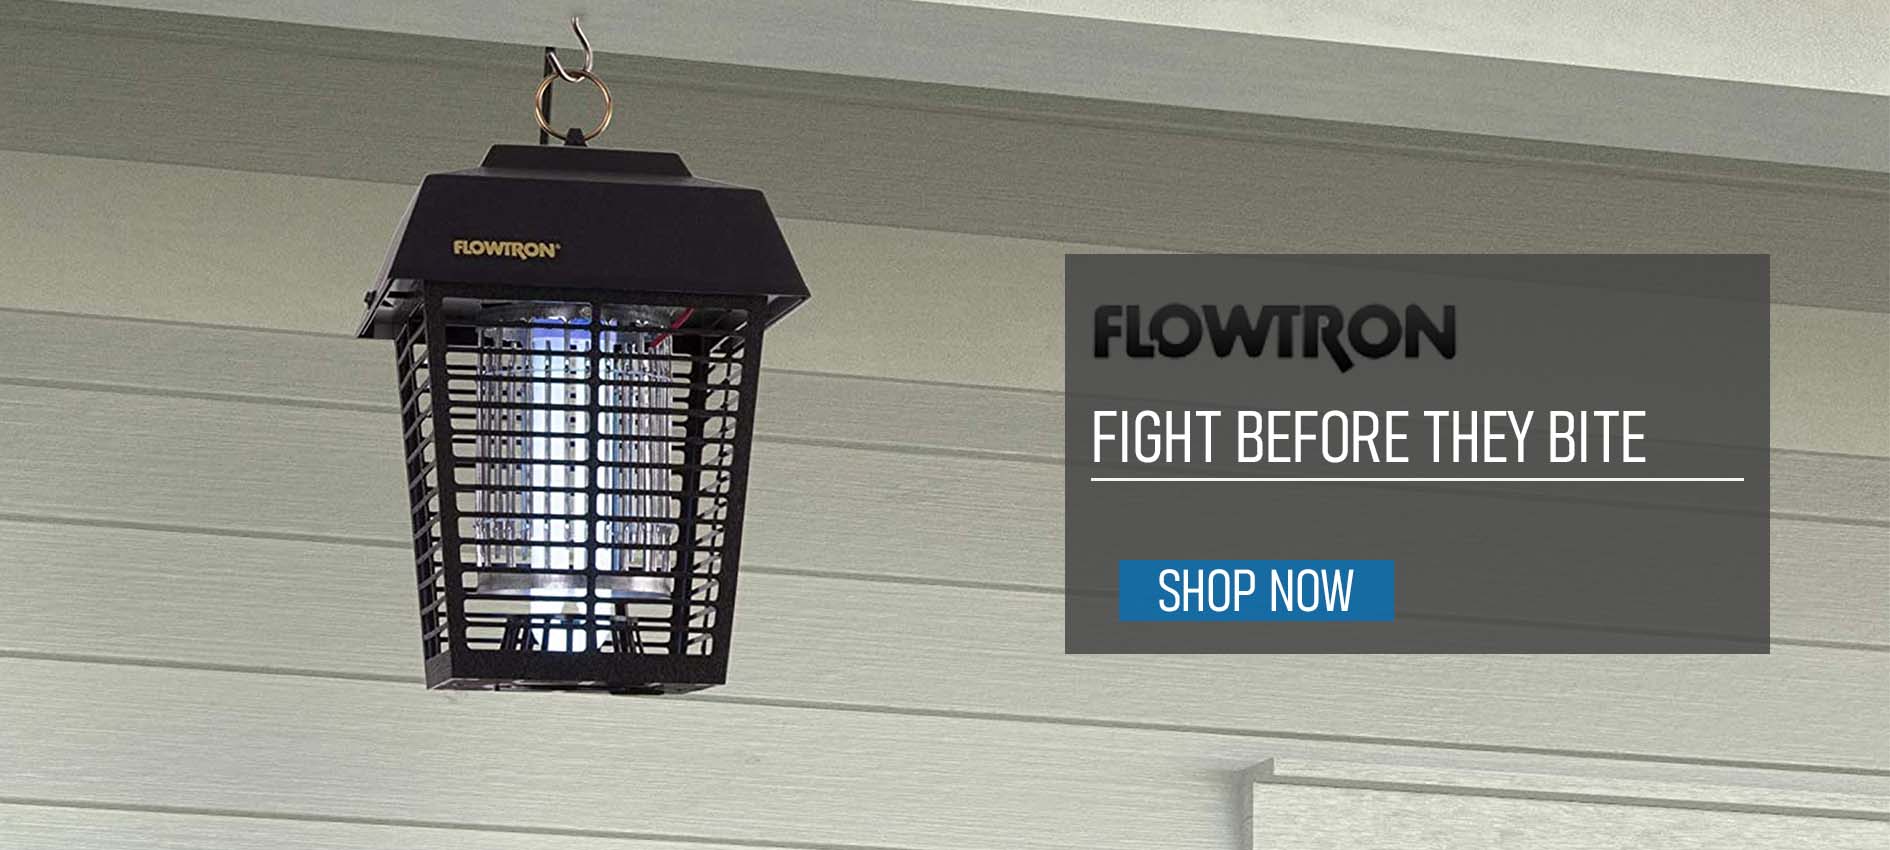 Flowtron Bug Zapper - Fight before they Bite 